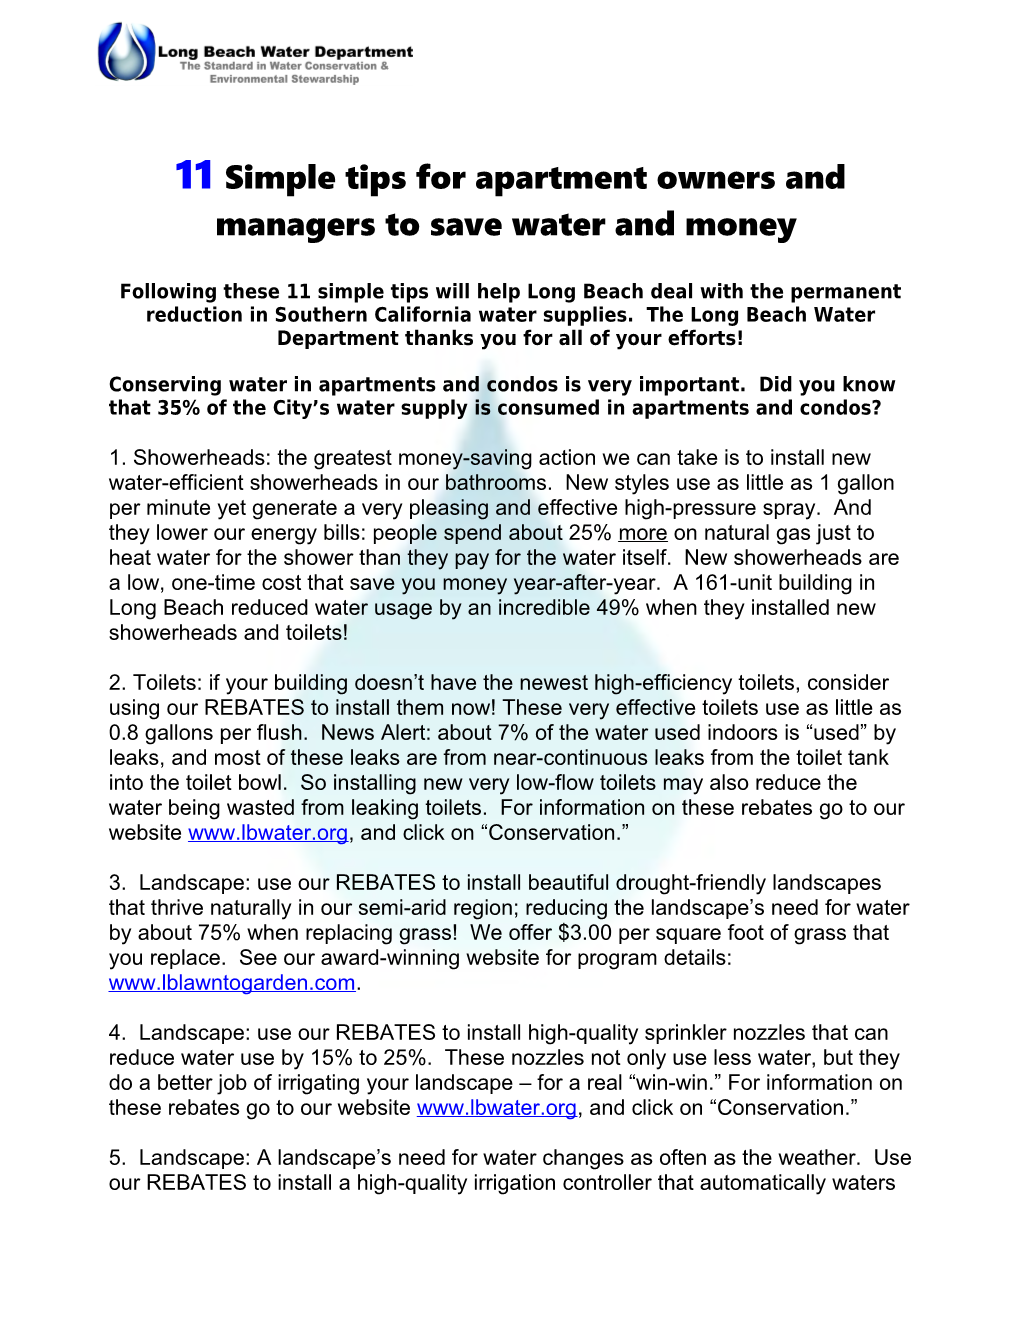 11Simple Tips for Apartment Owners and Managersto Save Water and Money